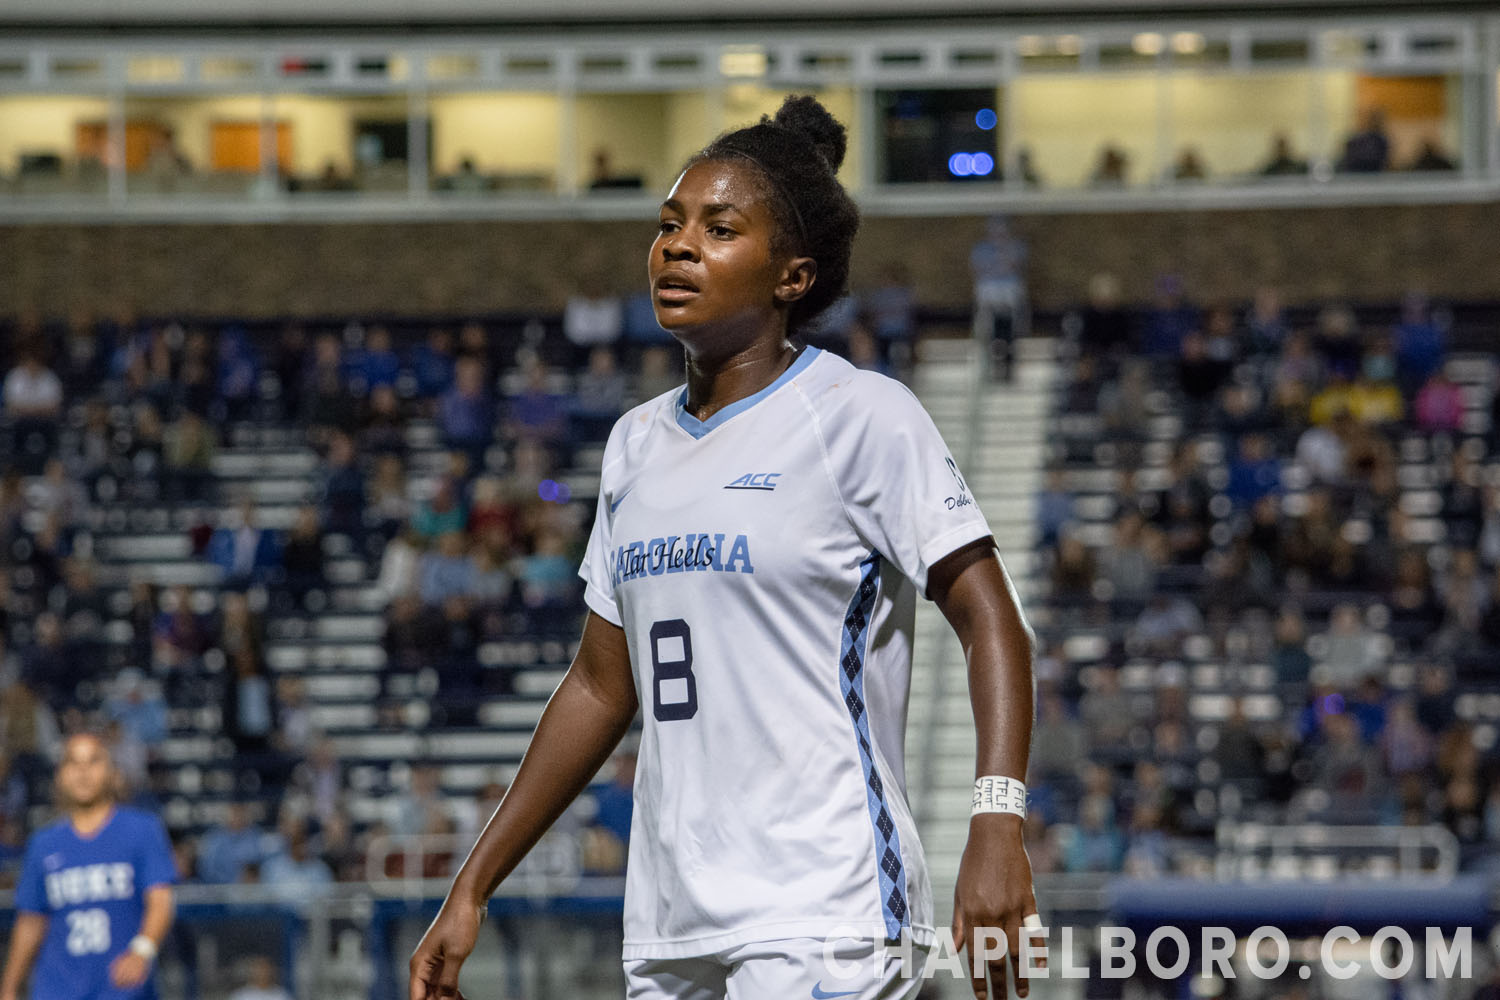 Her parents were UNC athletes. Now she wants to help the Tar Heels win a soccer title.